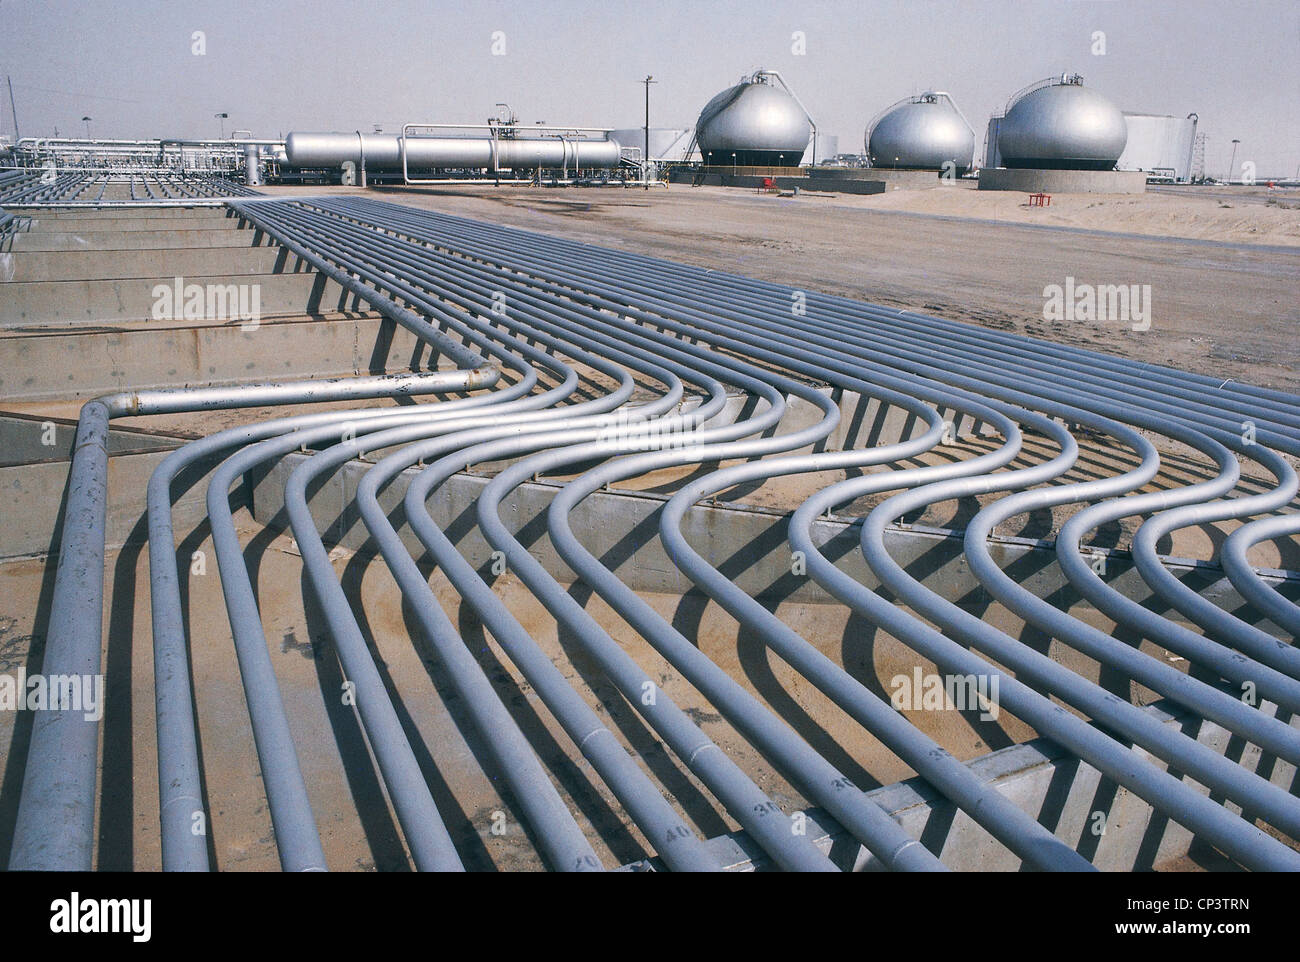 Saudi Arabia - Oil and separation plant-derived products in the oil center of Abqaiq Stock Photo